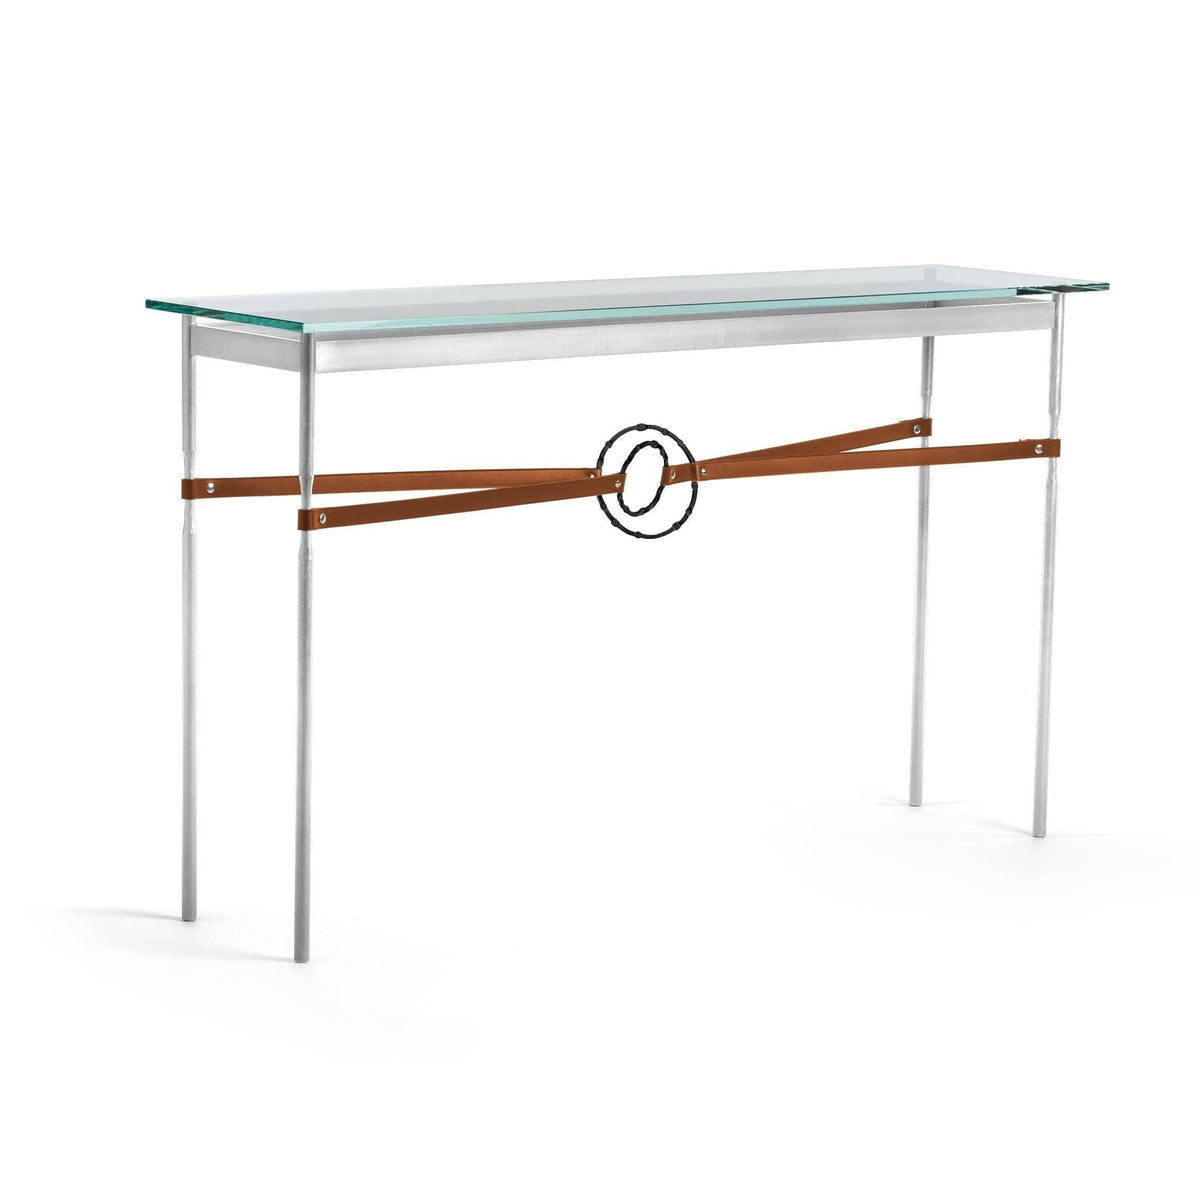 Hubbardton Forge - Equus Chestnut Leather Console Table - 750118-85-10-LC-VA0714 | Montreal Lighting & Hardware